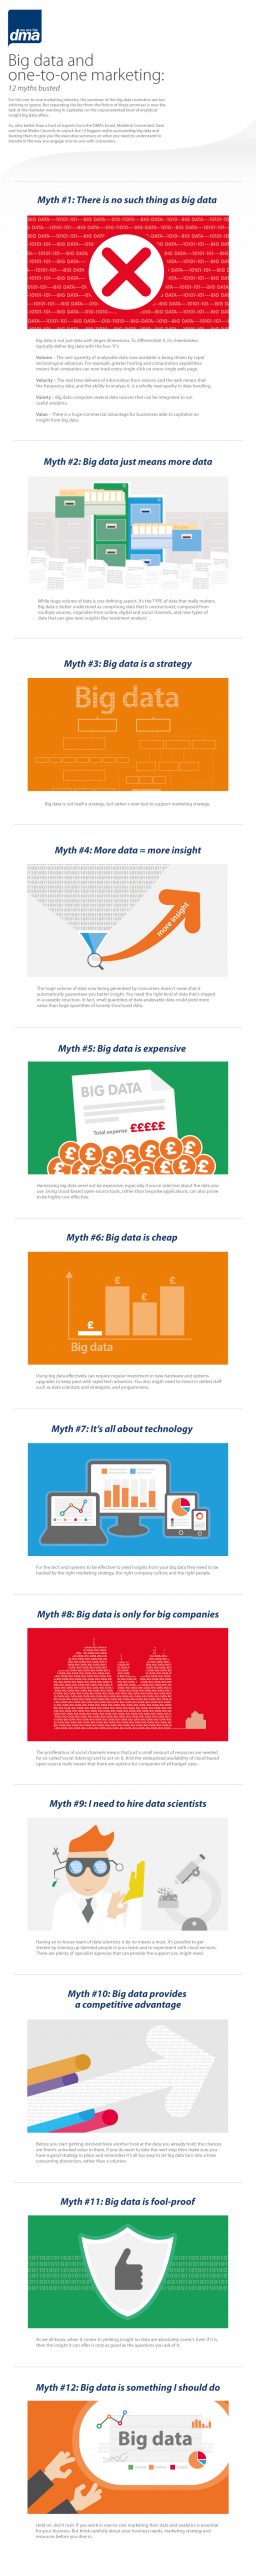 12 Big Data One-to-One Marketing Myths - Infographic